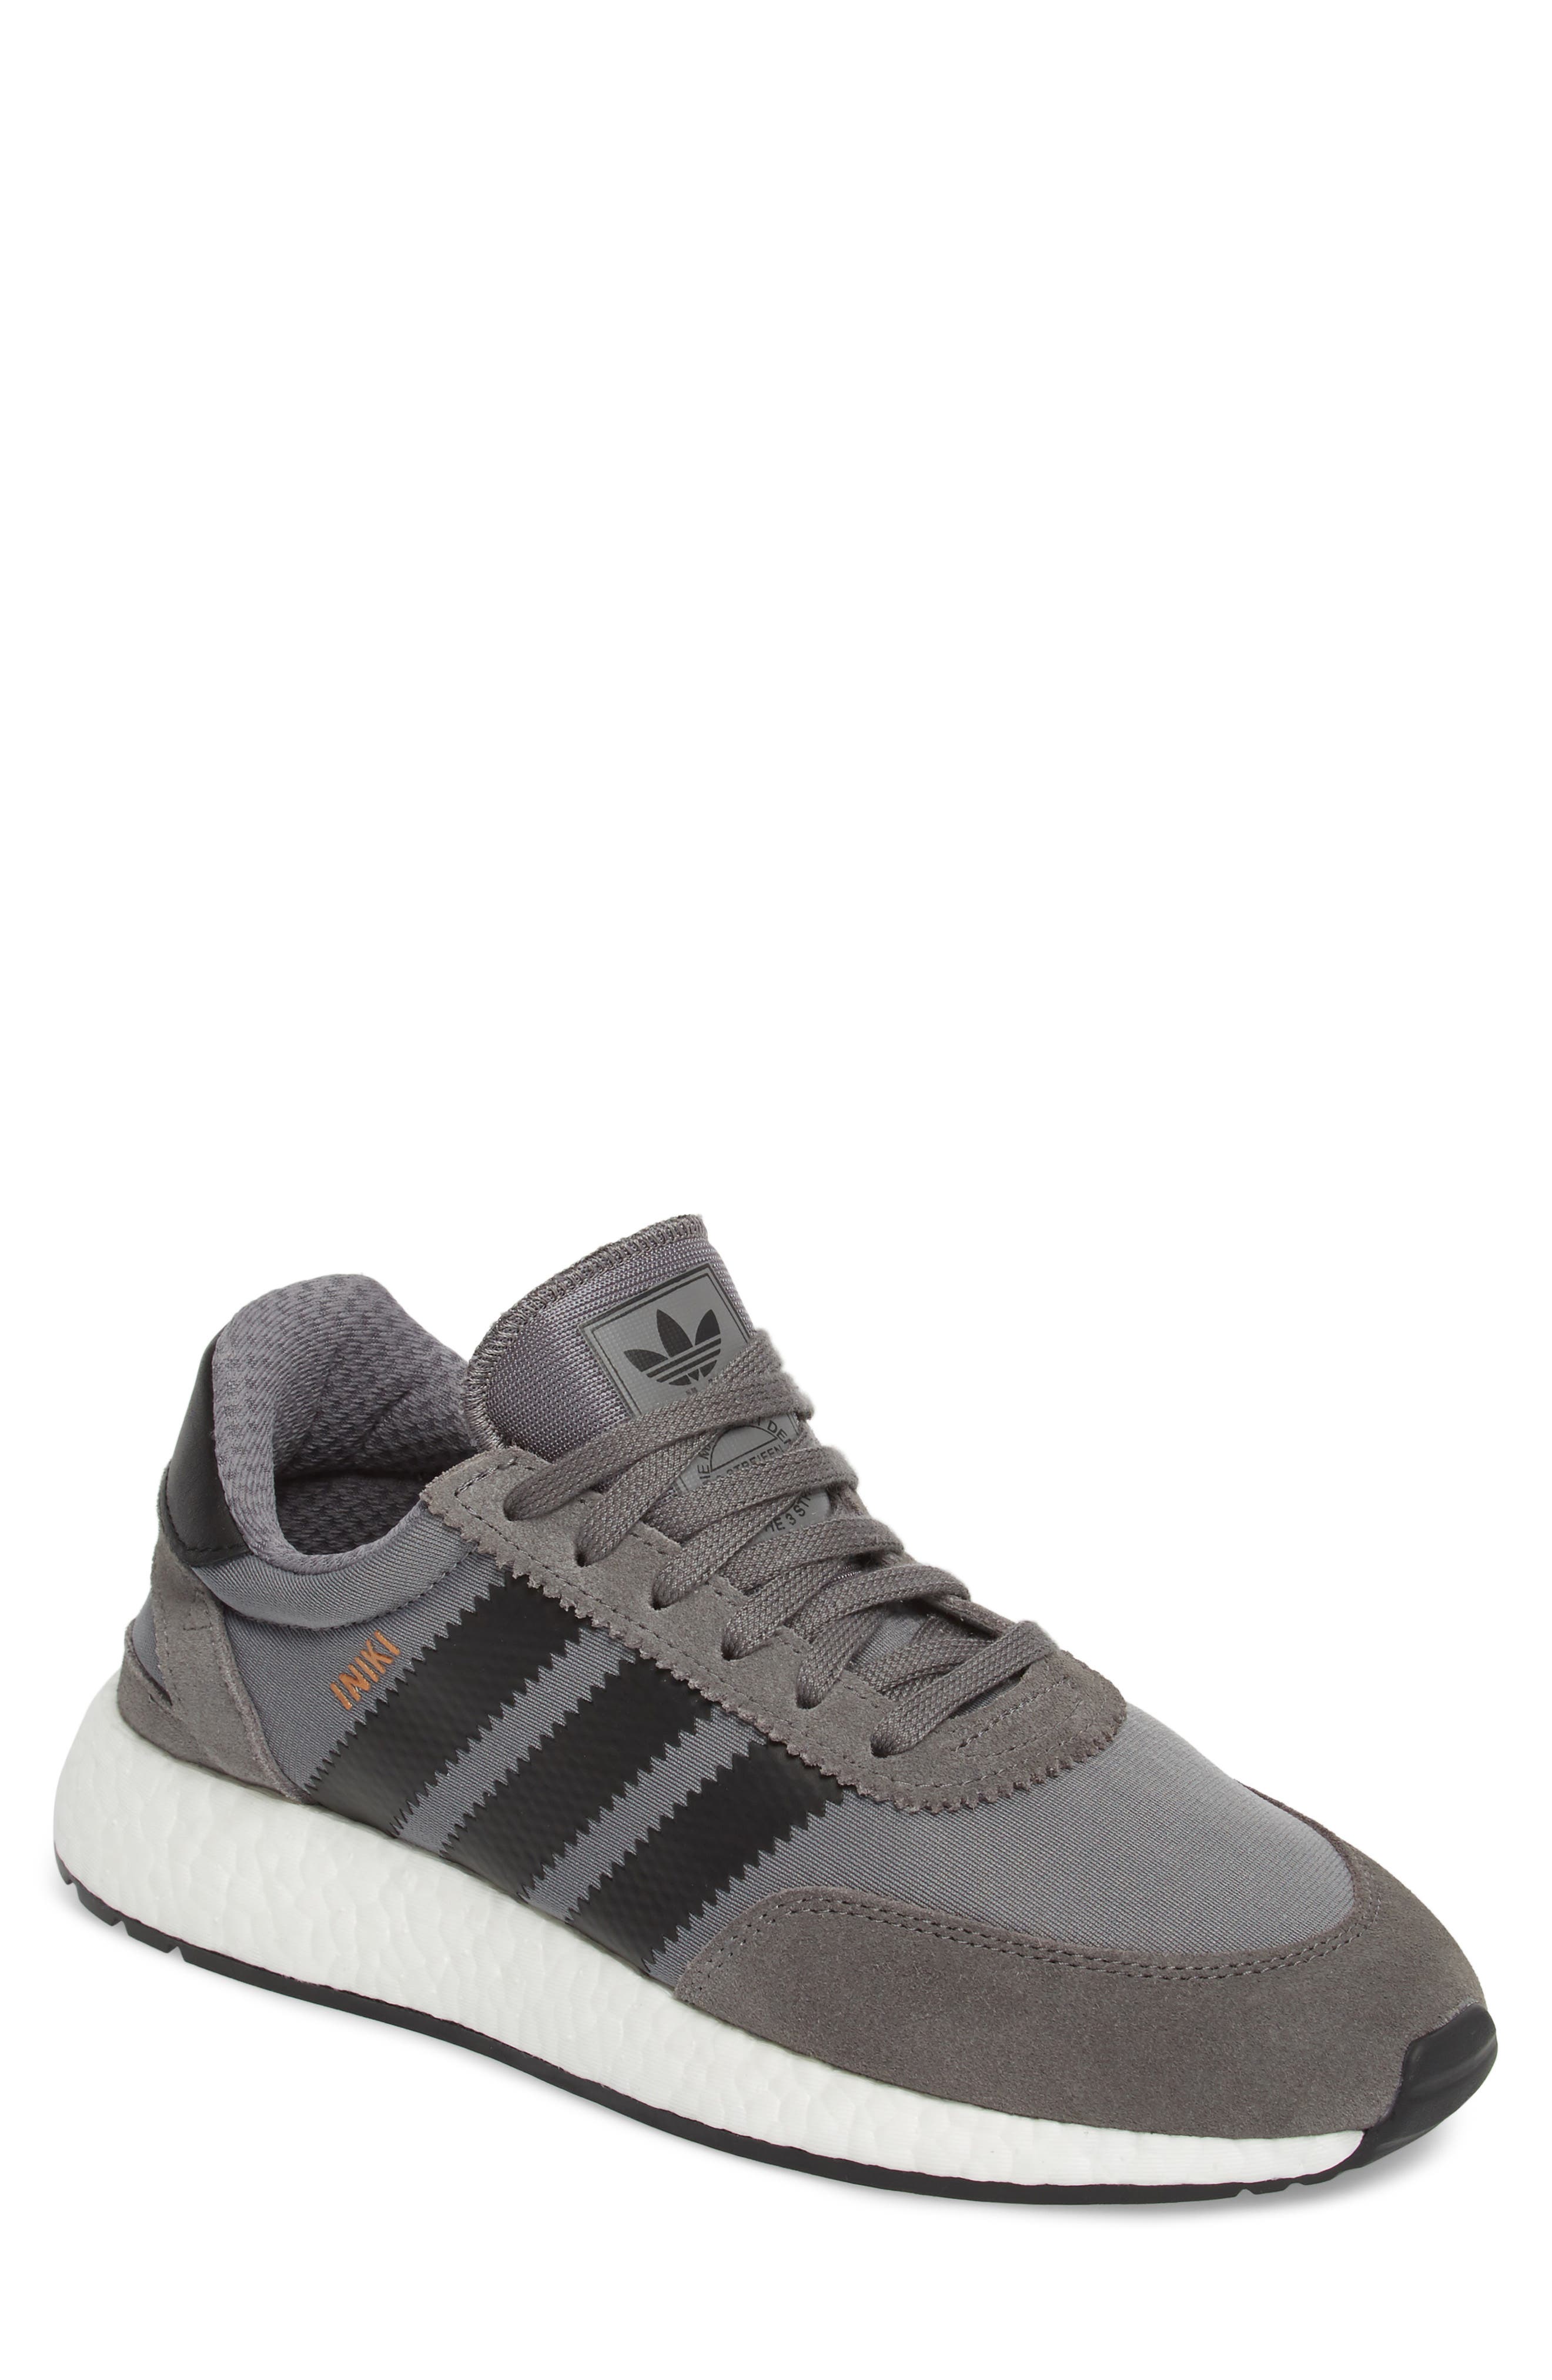 Adidas Originals I-5923 Runner Boost Sneakers In Gray By9732 - Gray ...